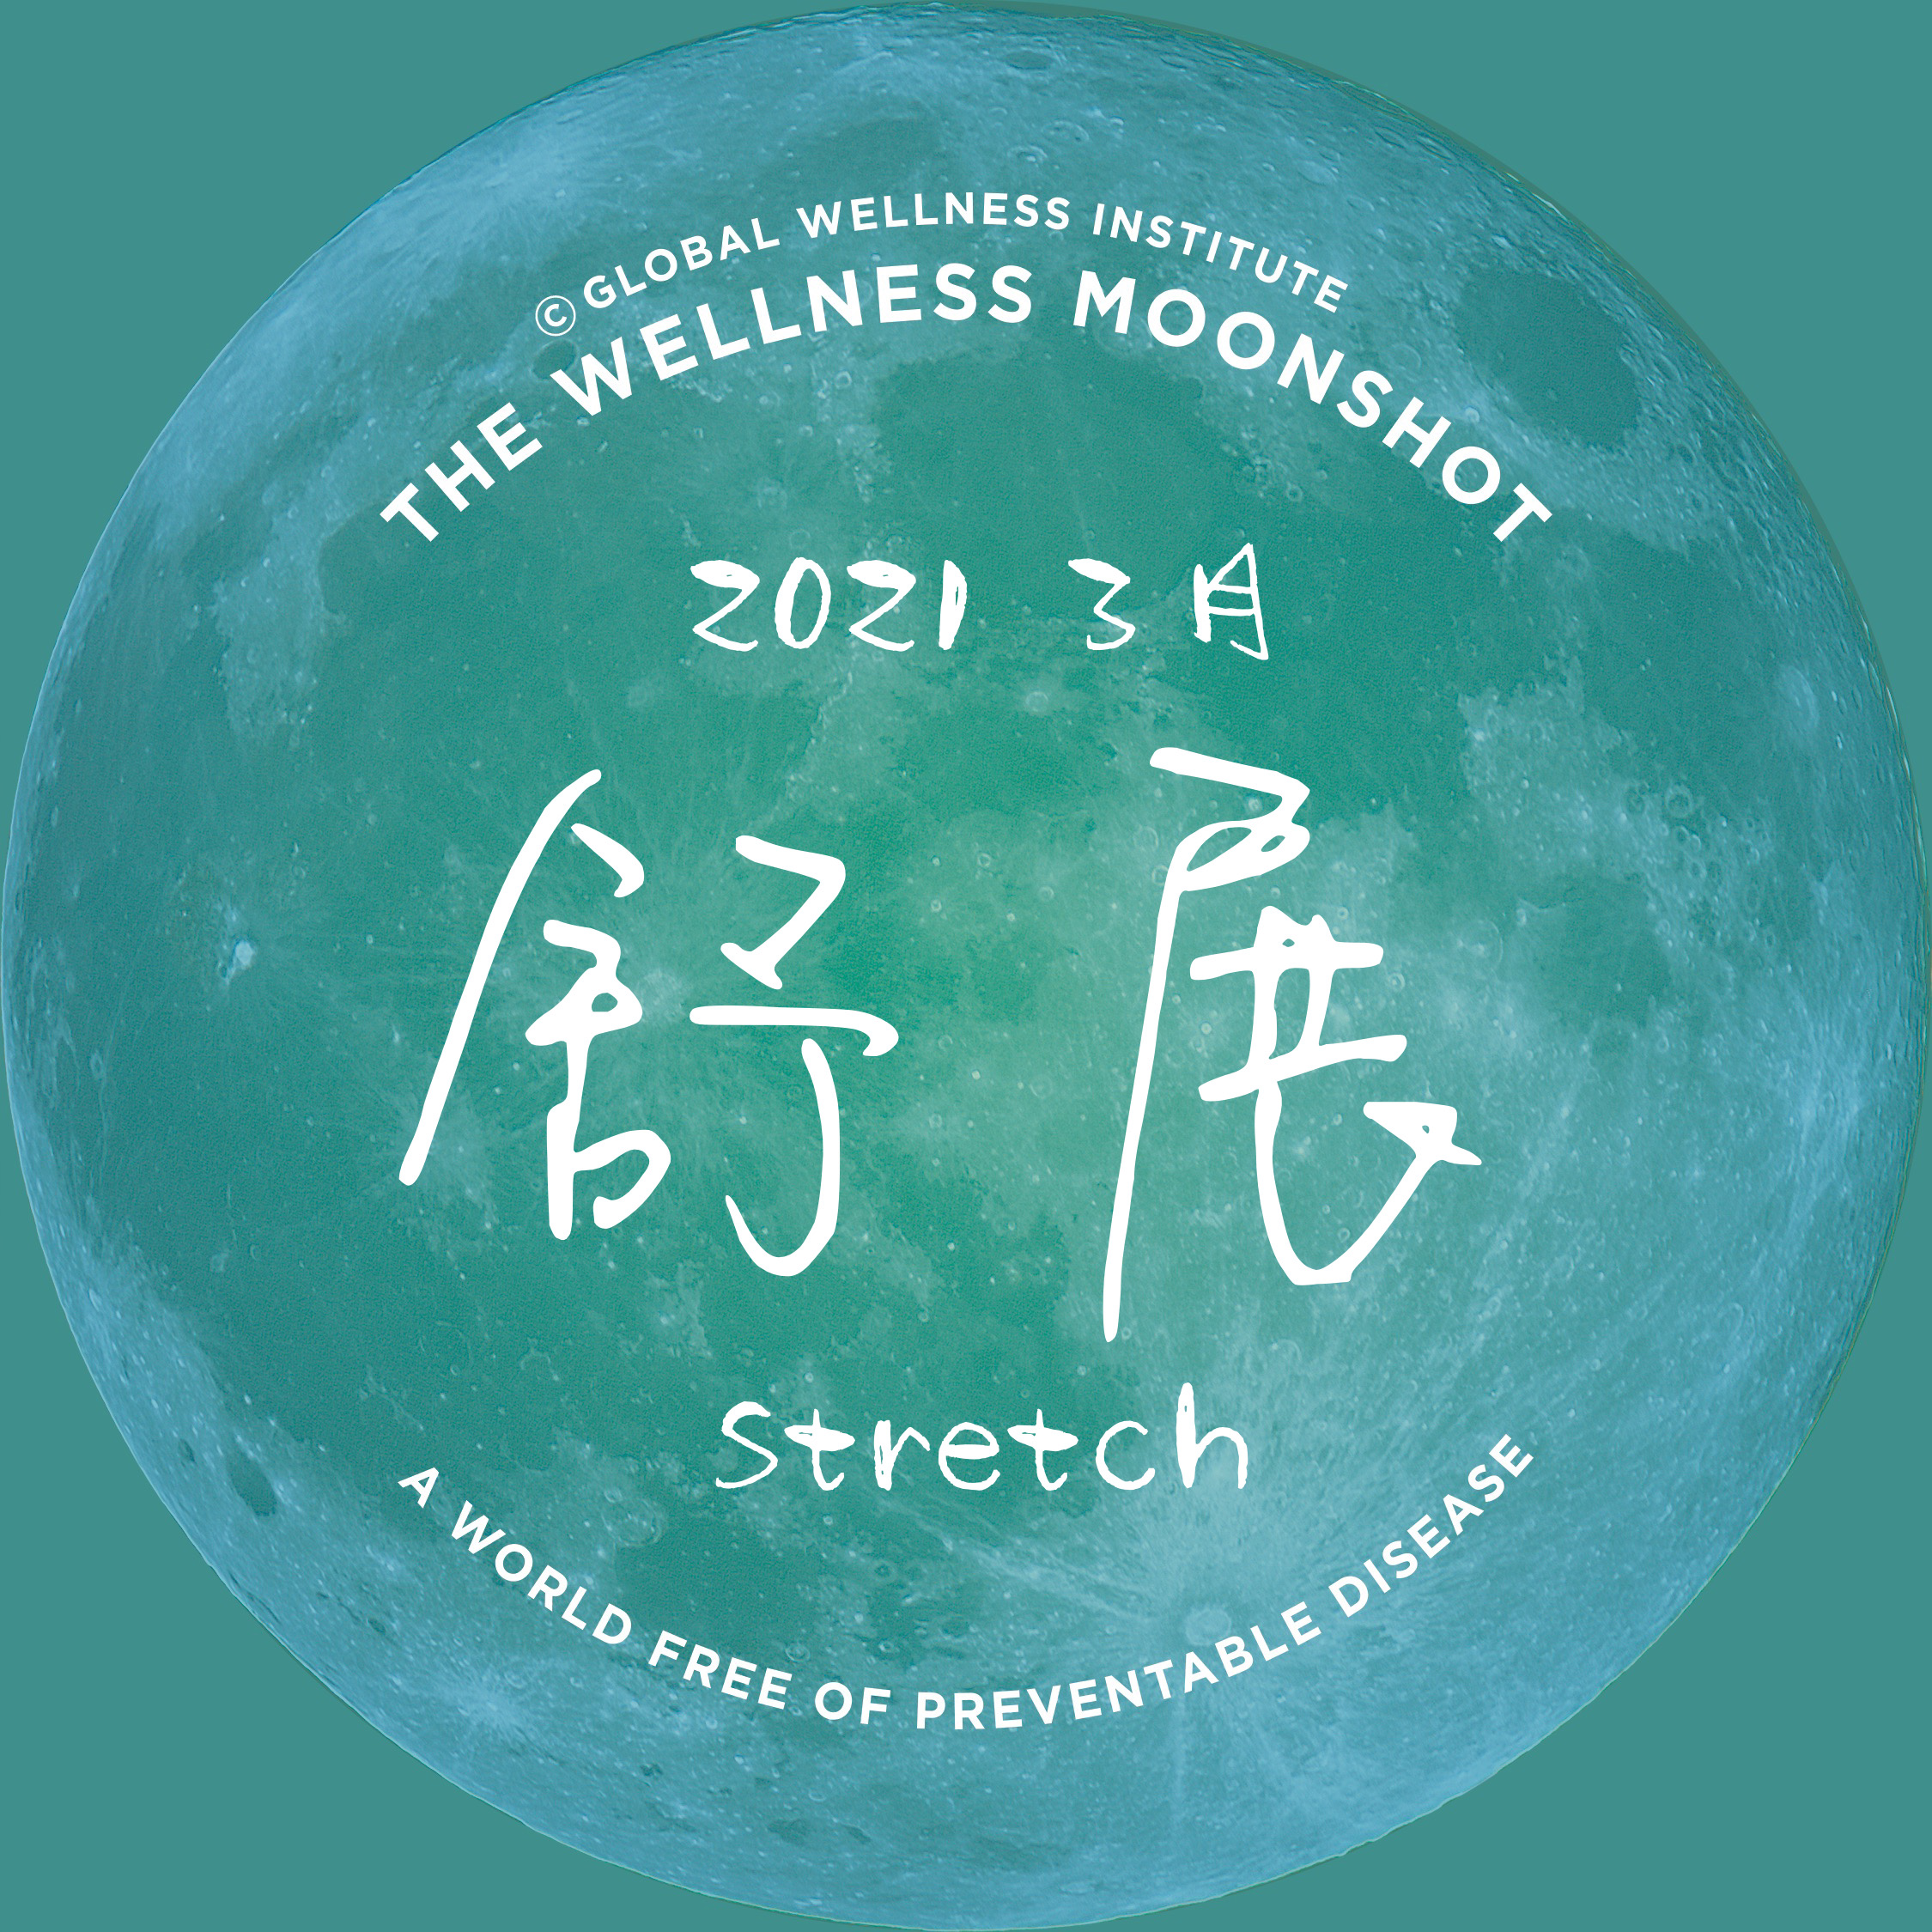 The March China Moonshot encourages stretching and highlights two sacred Chinese calendar dates: the "Awakening of Insects" and the Spring Equinox.